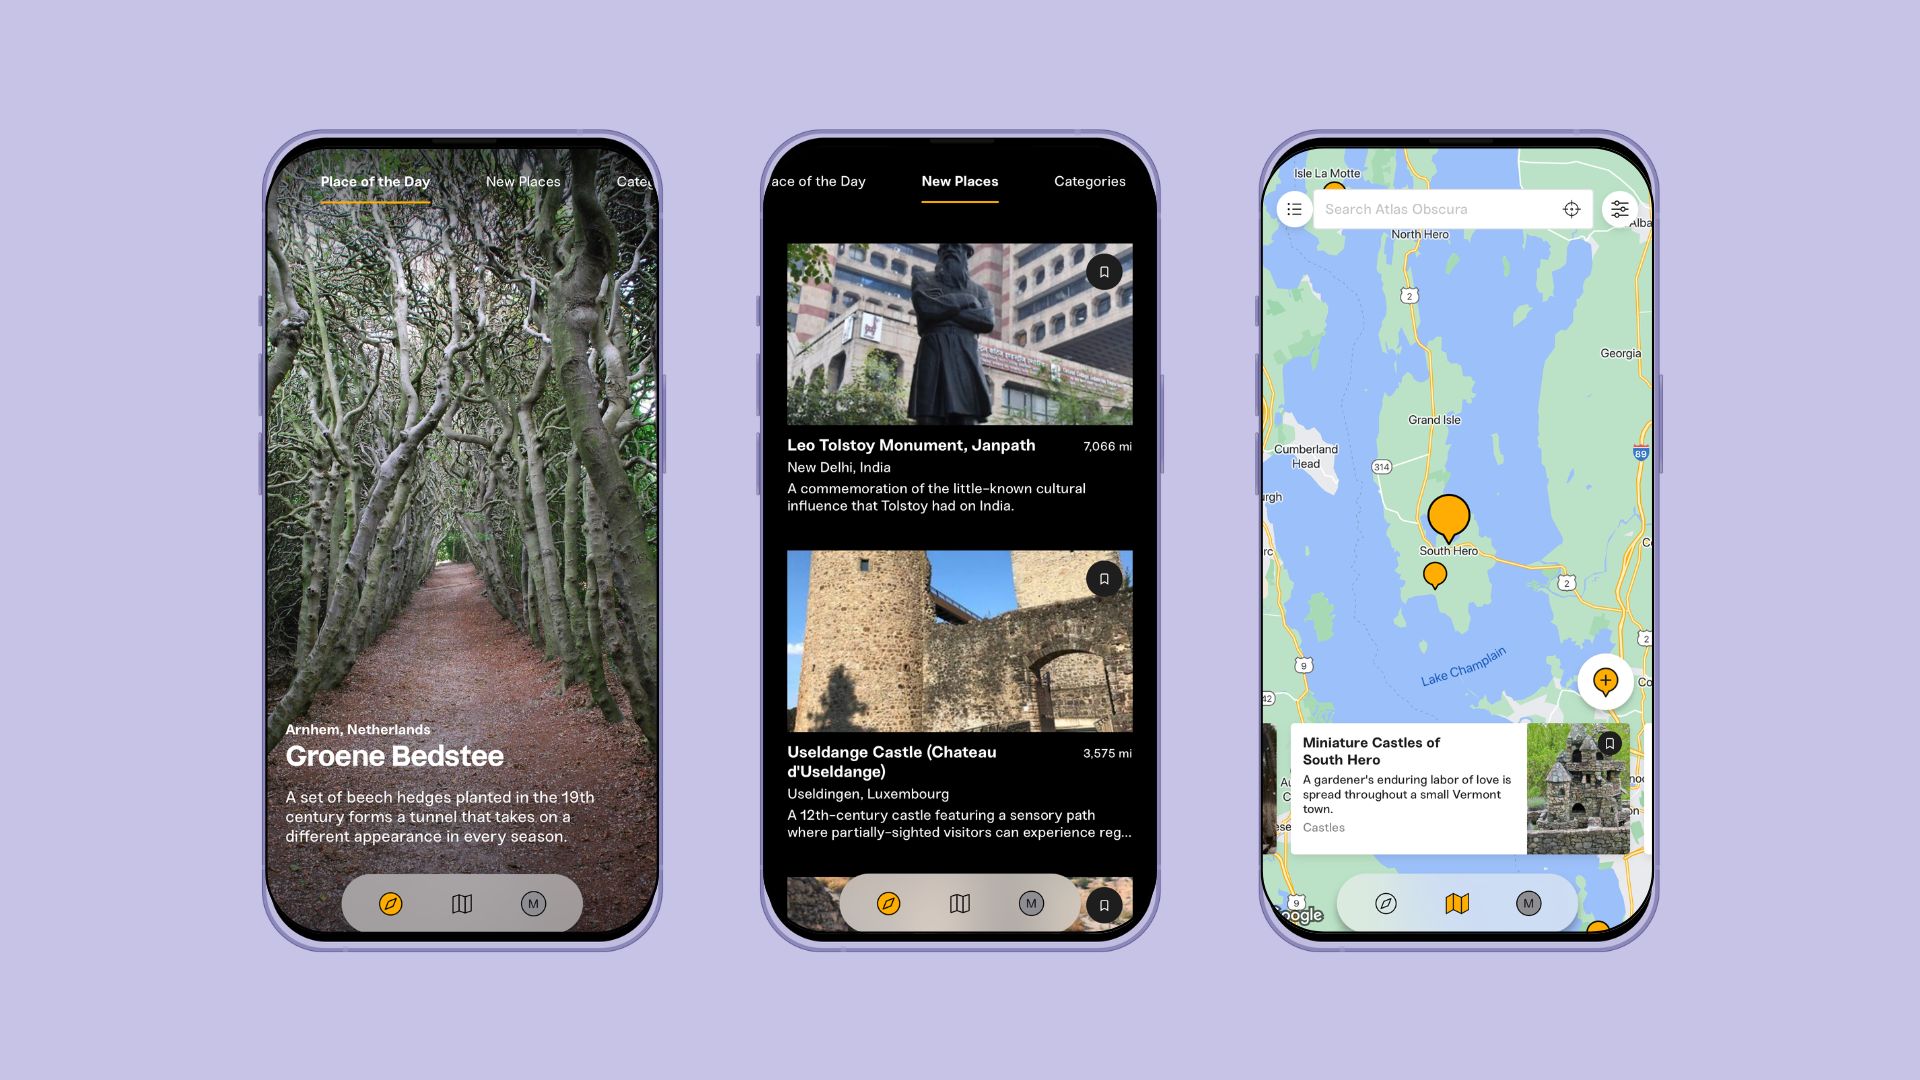 Three mobile phones are placed on a light purple background, displaying different screens from the Atlas Obscura app.

In the left screenshot, the path with trees looks like a magical spot, and the 